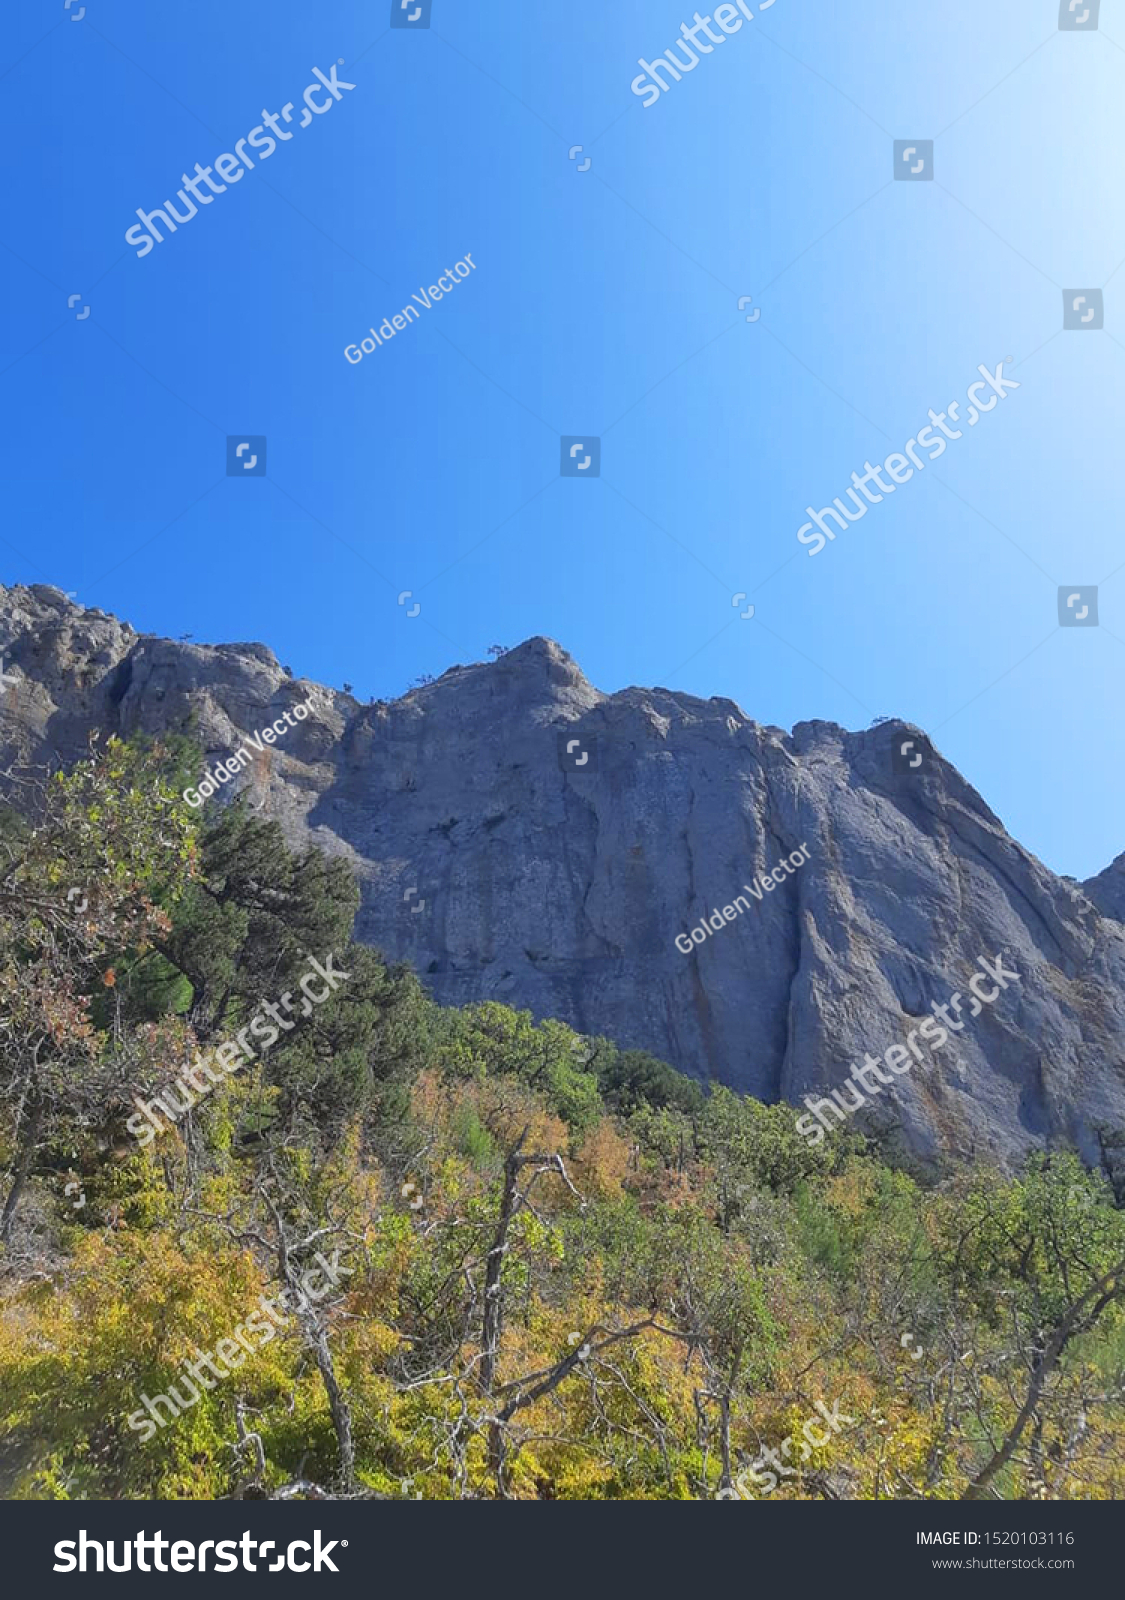 Mountain landscape. Mountain landscape with trees and moss against the blue sky. Photo of a mountain landscape. #1520103116